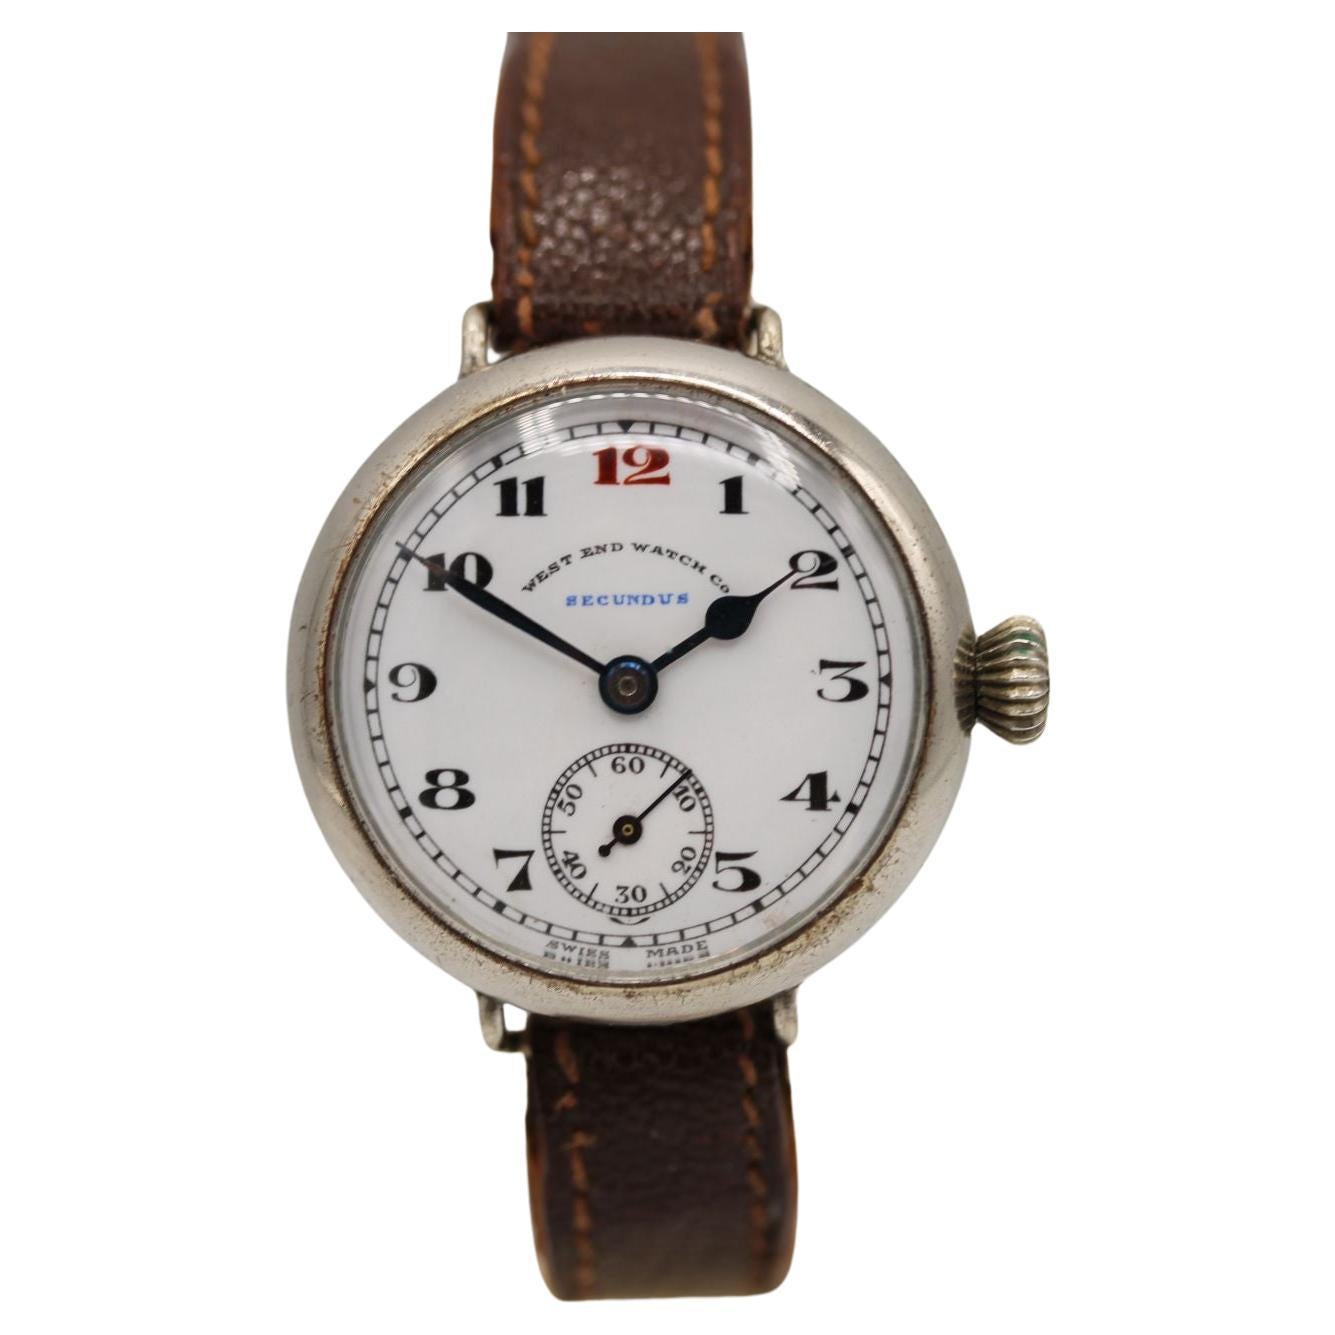 West End Watch Company Secundus Indian Army Watch